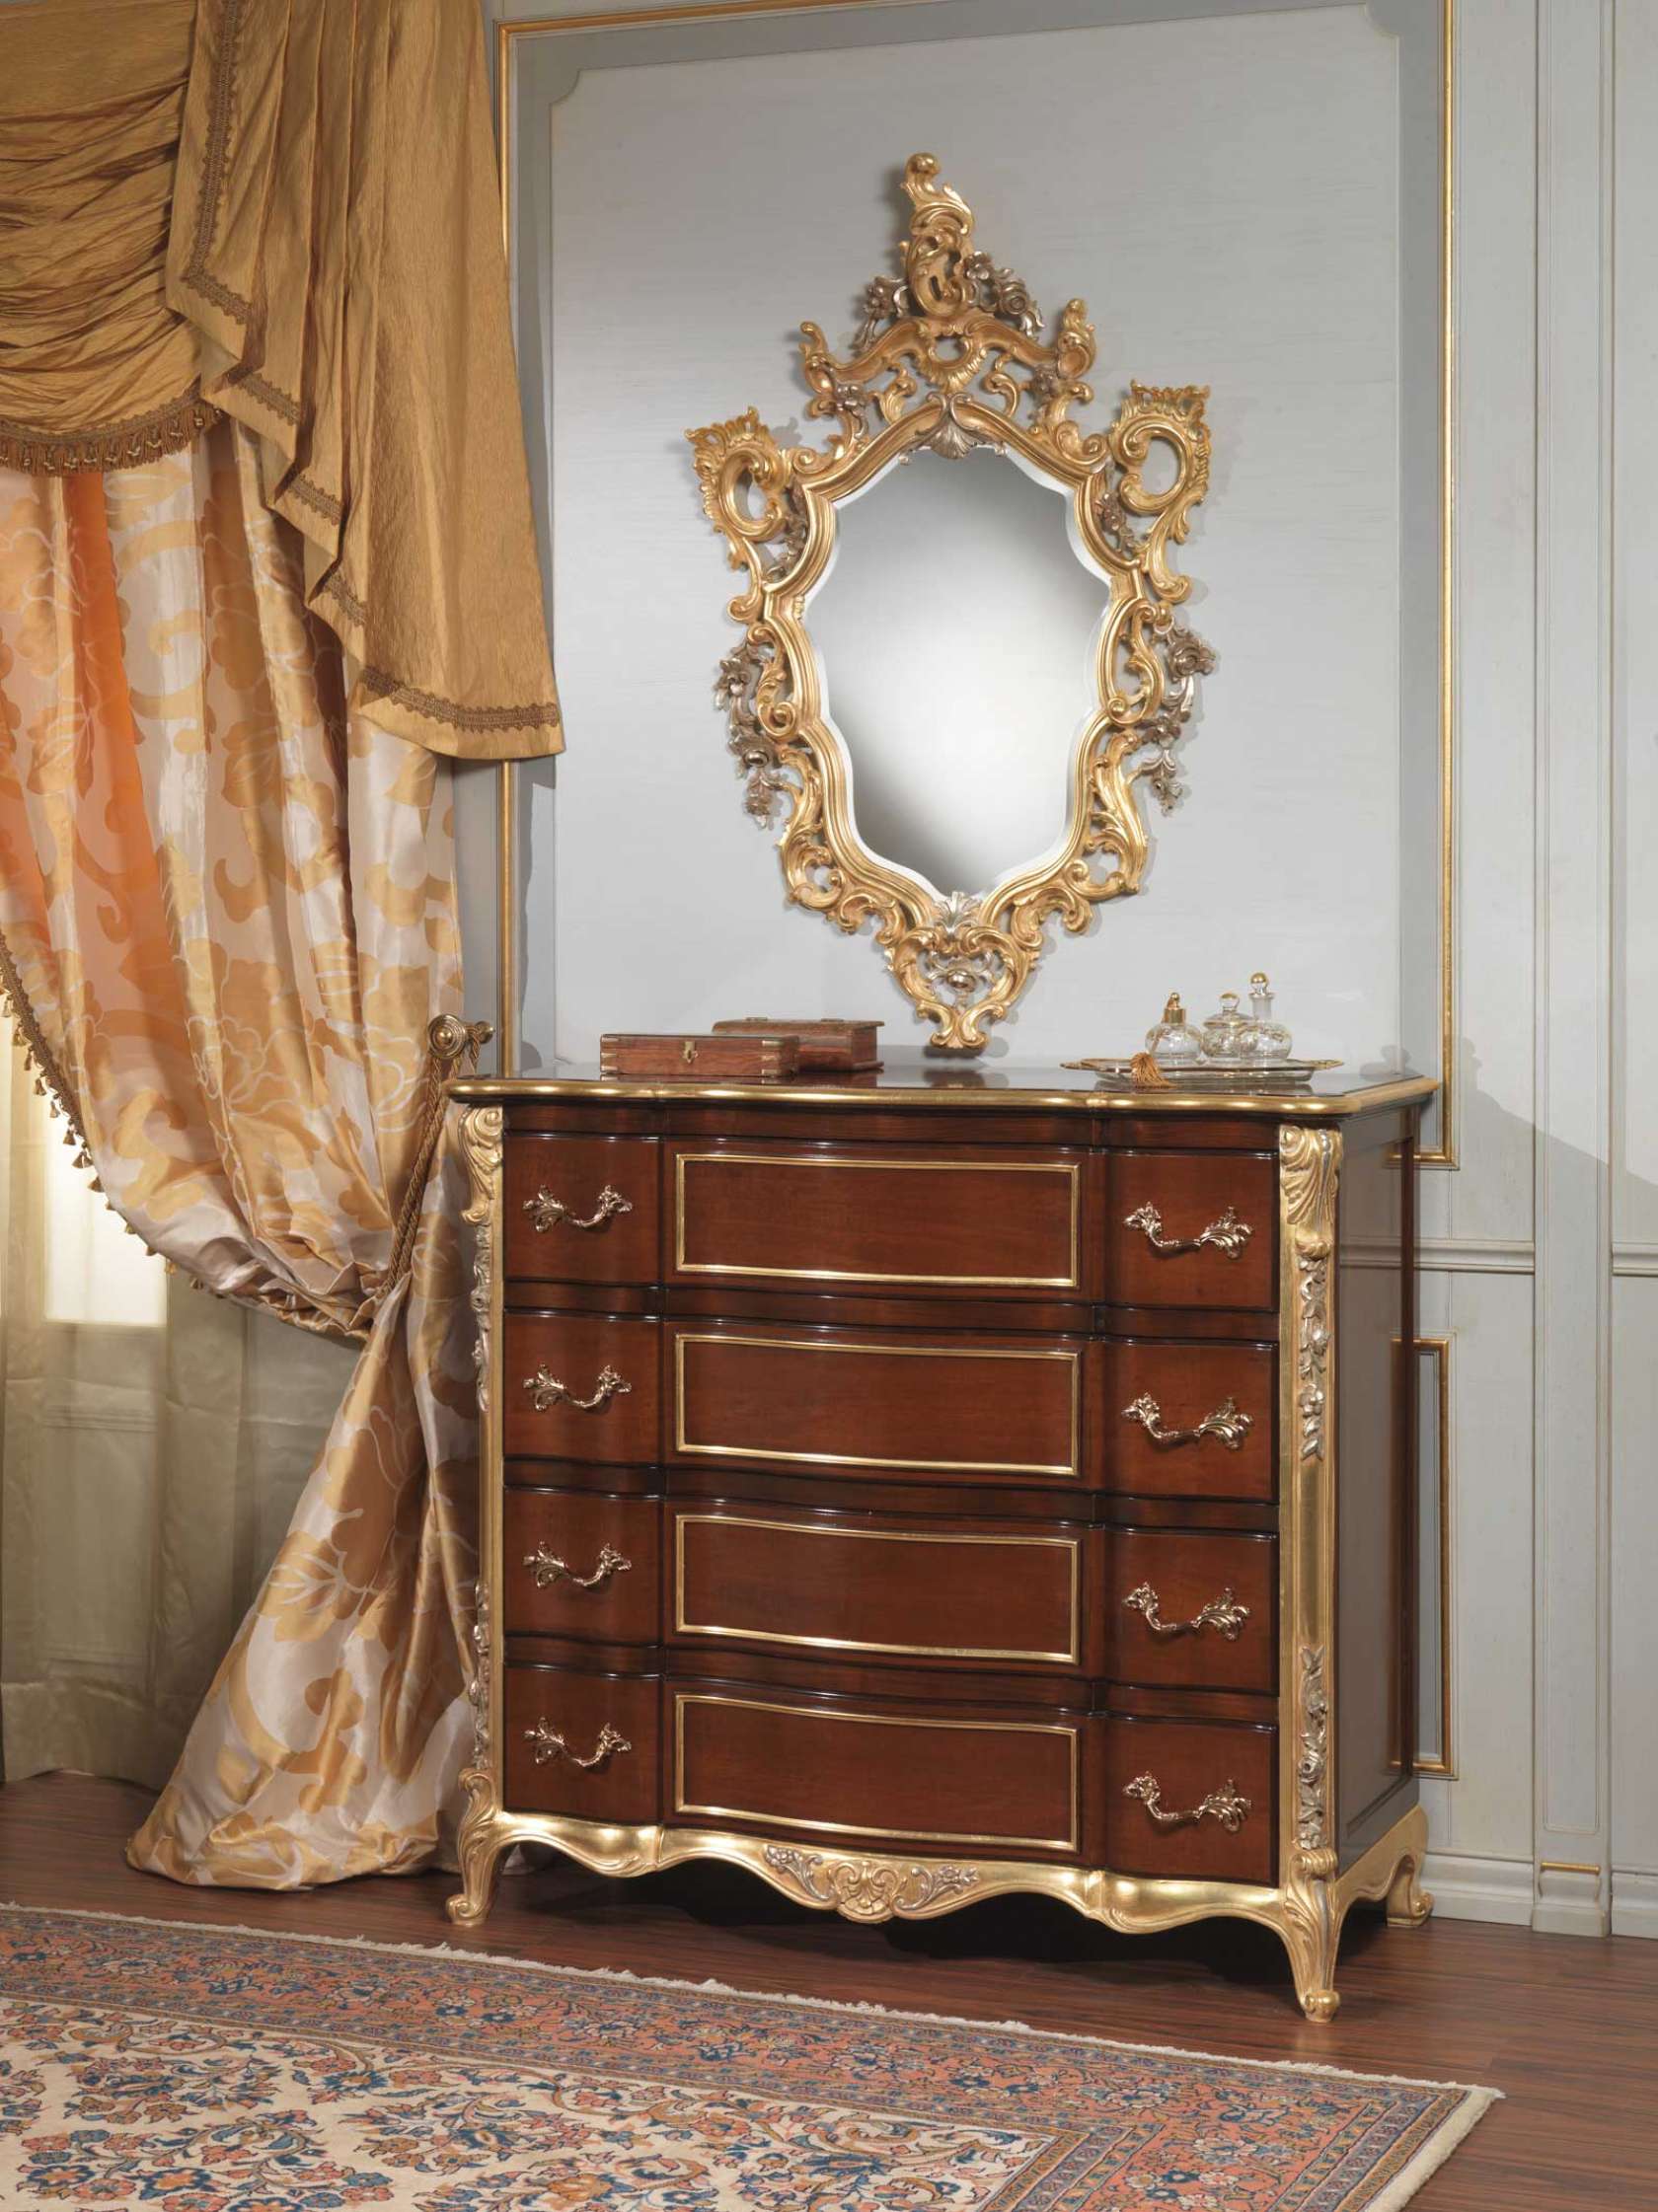 Classic Italian Bedroom 18th Century Chest Of Drawers And Wall Mirror Vimercati Classic Furniture